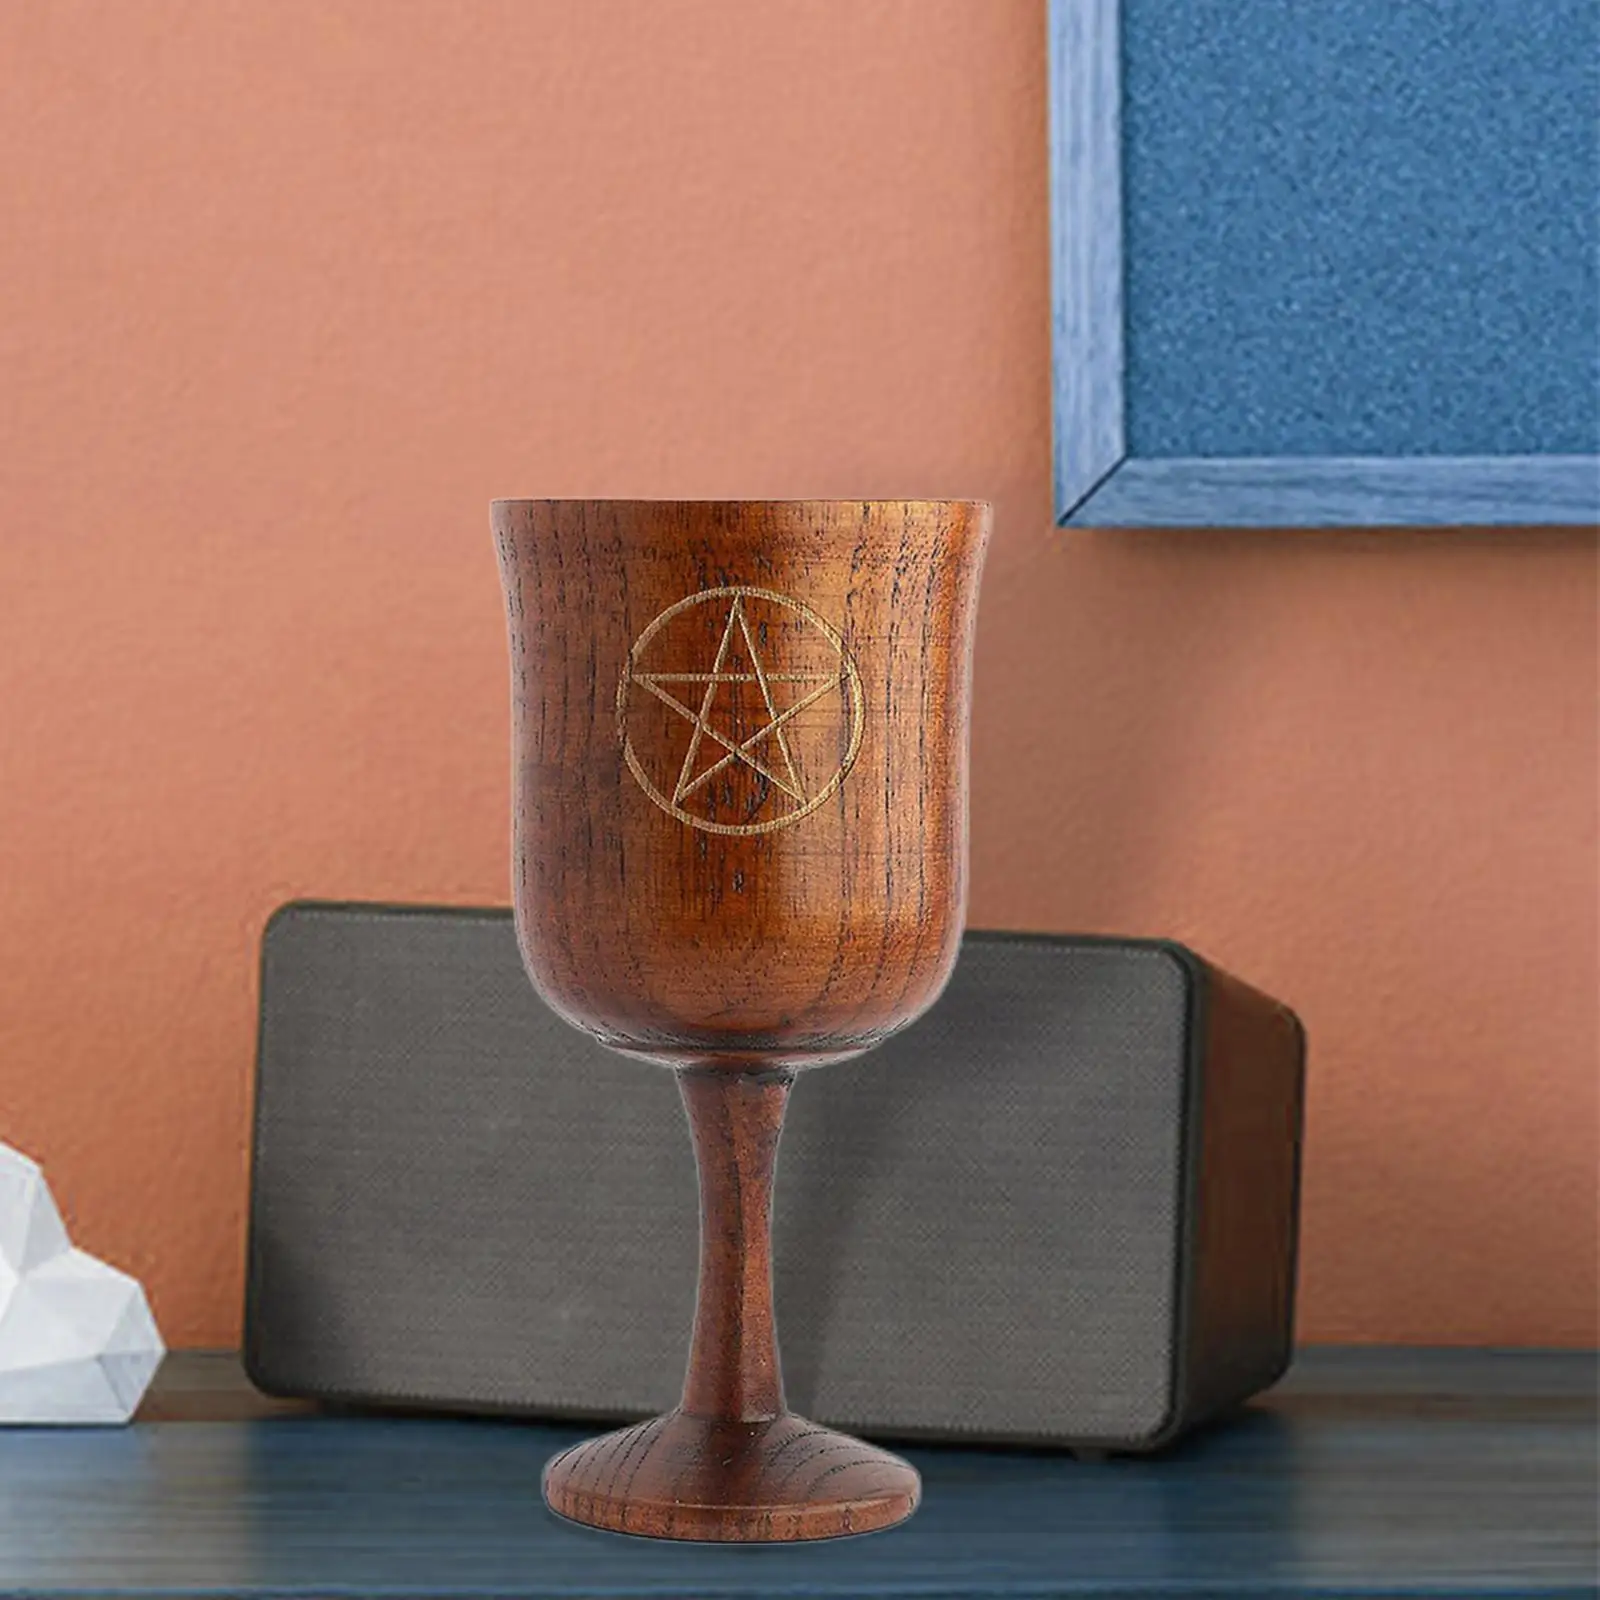 Religious Ritual Cup Tea Mug Altar Goblets Pentacle Drinkware Wine Glasses Divination Tarot Witchcraft Wooden Goblet